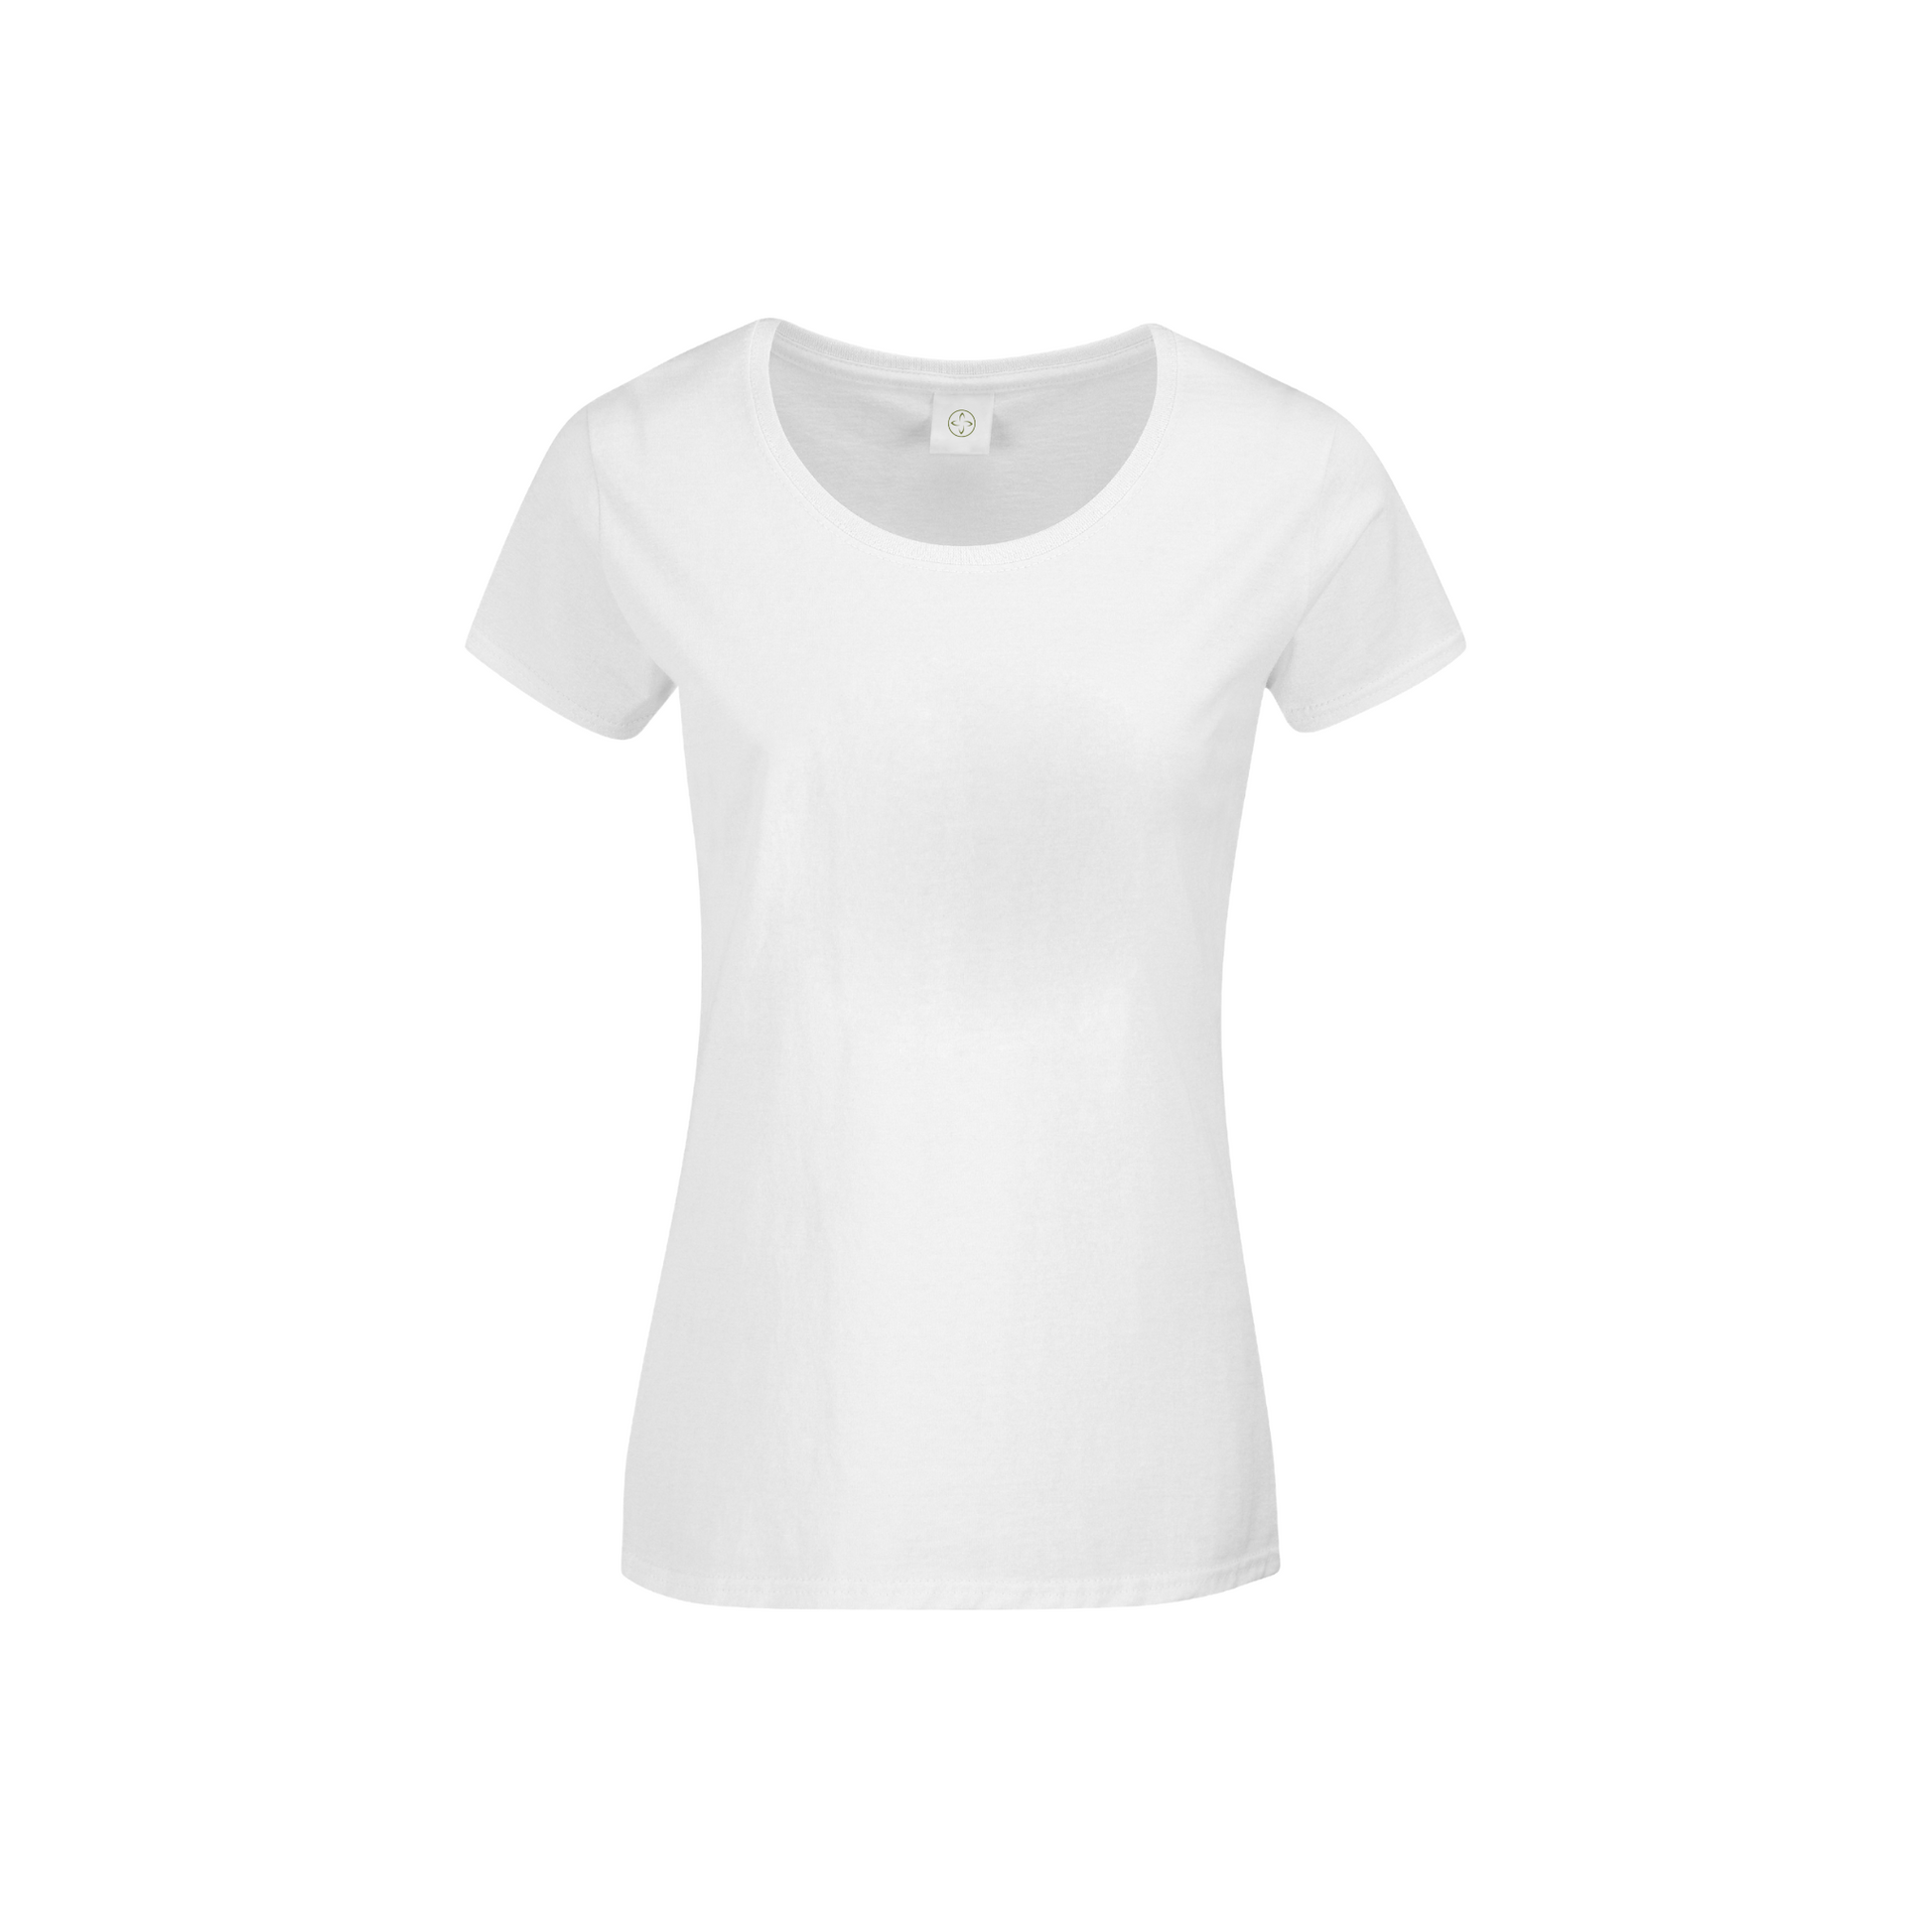 Soft and comfortable bamboo cotton lounge T-shirts in white